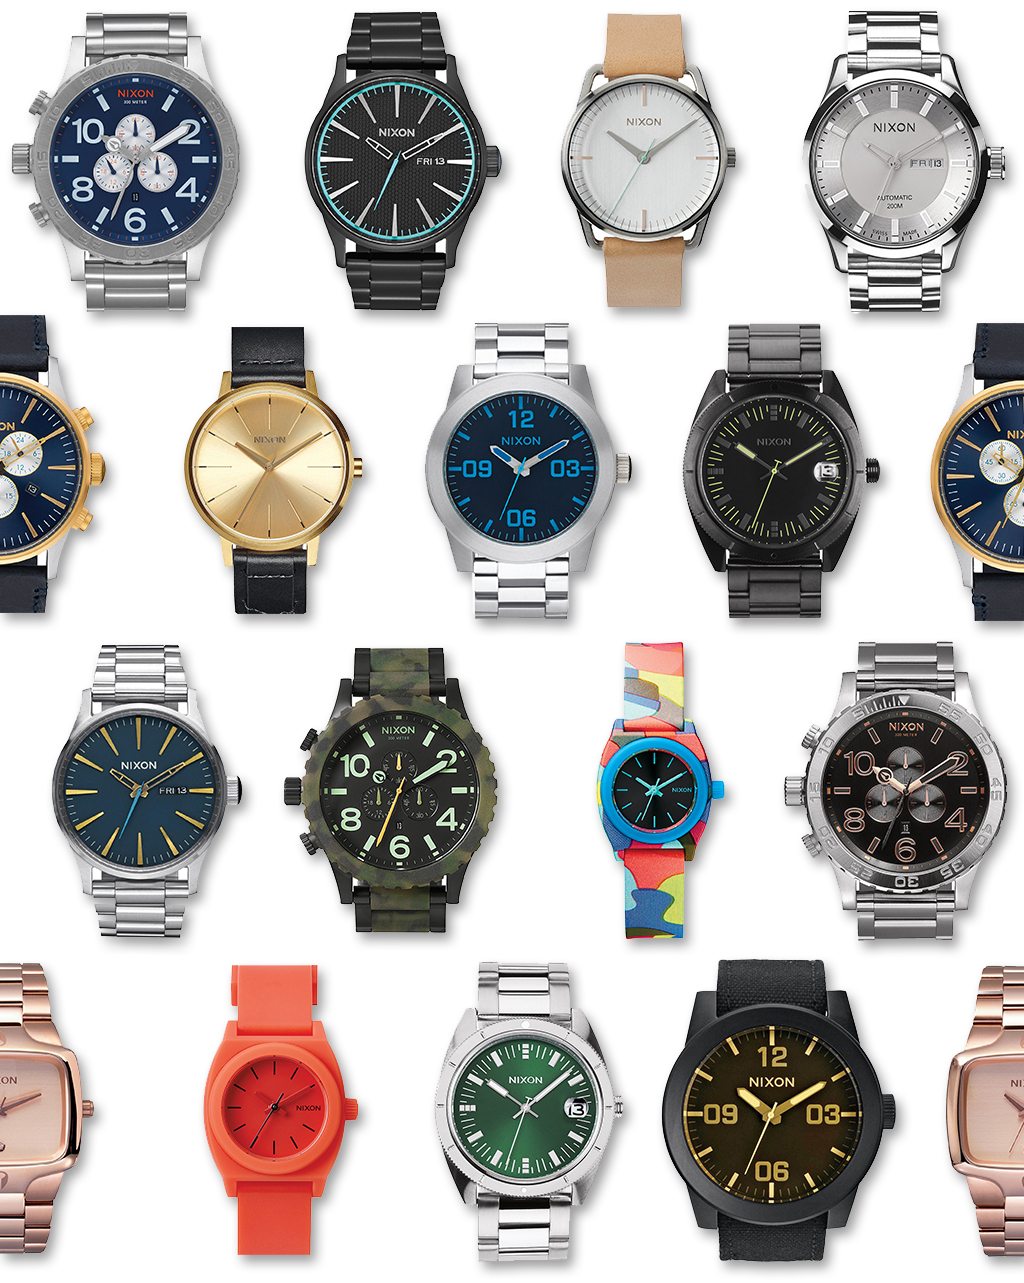 Group on Nixon Watches